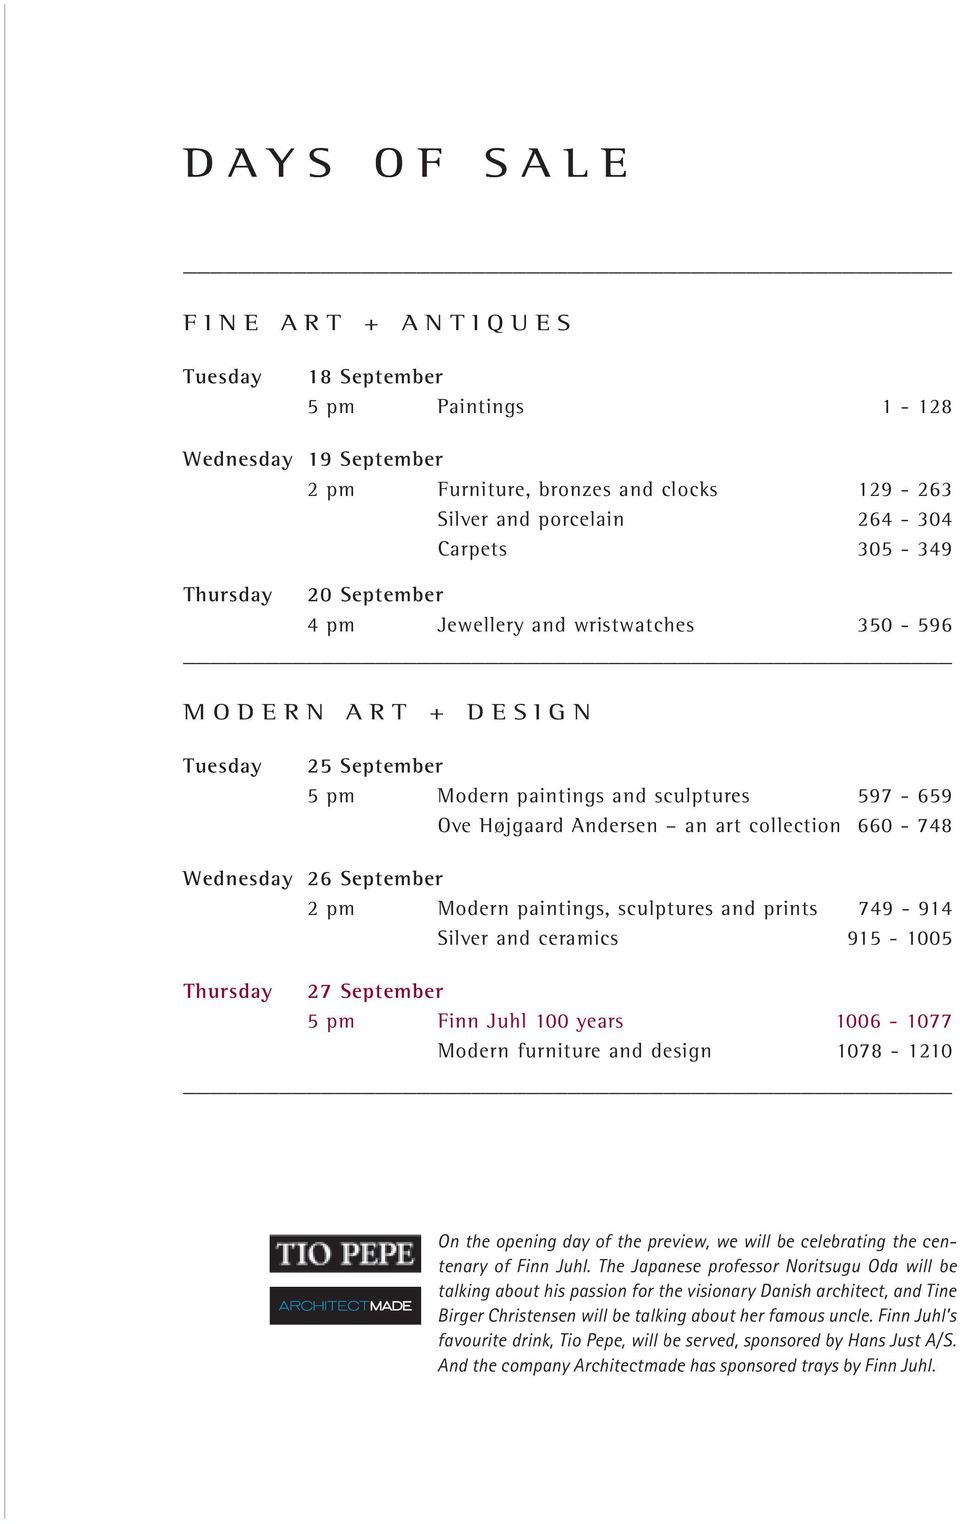 Wednesday 26 September 2 pm Modern paintings, sculptures and prints 749-914 Silver and ceramics 915-1005 Thursday 27 September 5 pm Finn juhl 100 years 1006-1077 Modern furniture and design 1078-1210